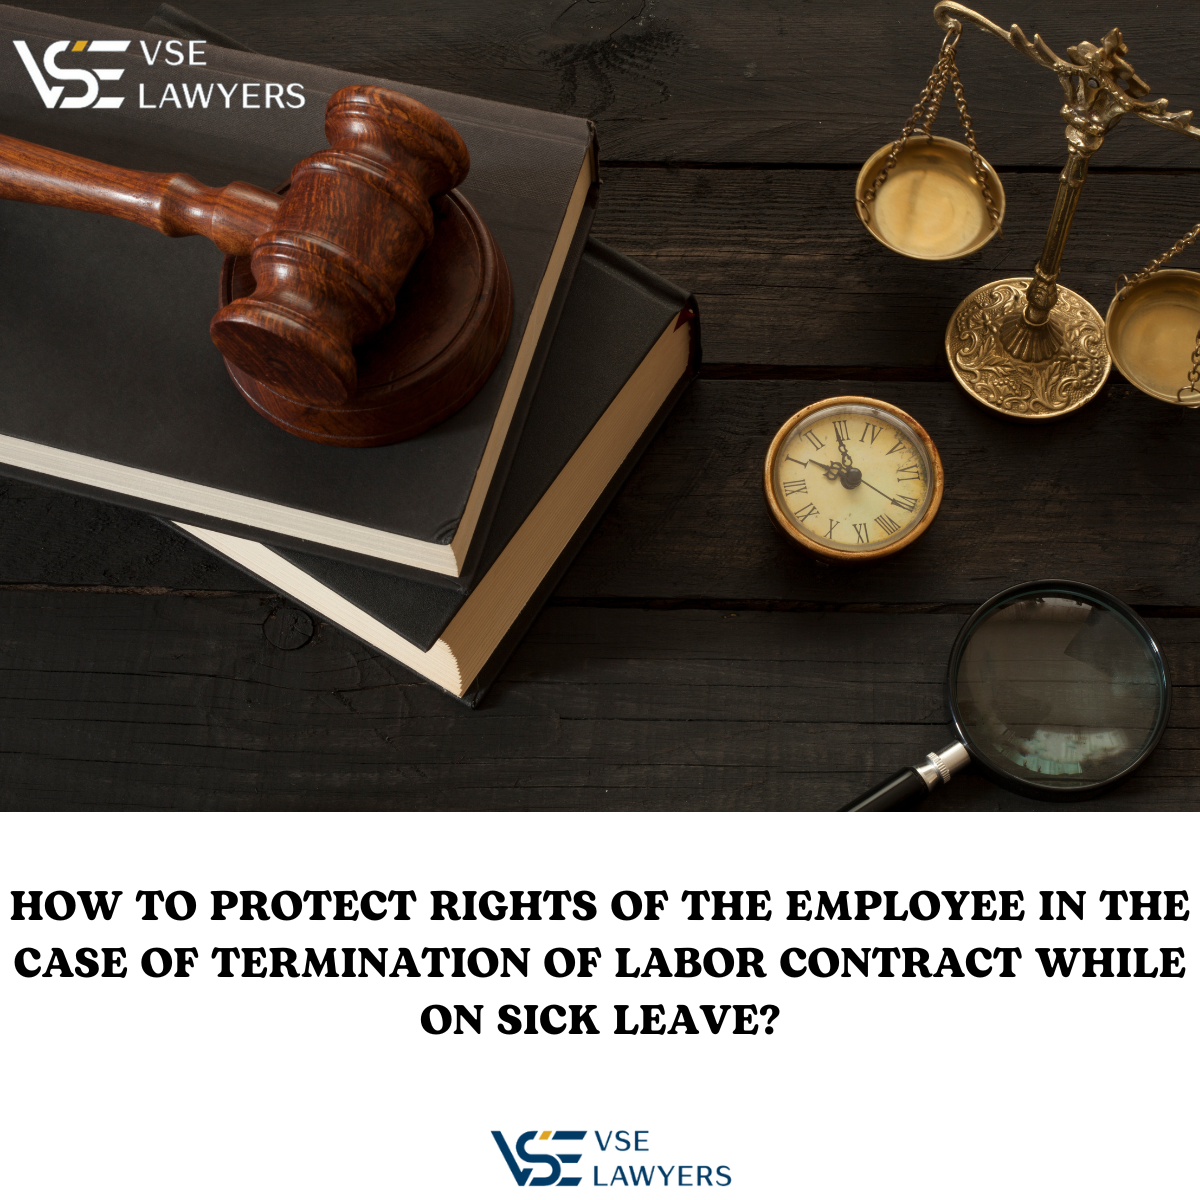 HOW TO PROTECT RIGHTS OF THE EMPLOYEE IN THE CASE OF TERMINATION OF LABOR CONTRACT WHILE ON SICK LEAVE?